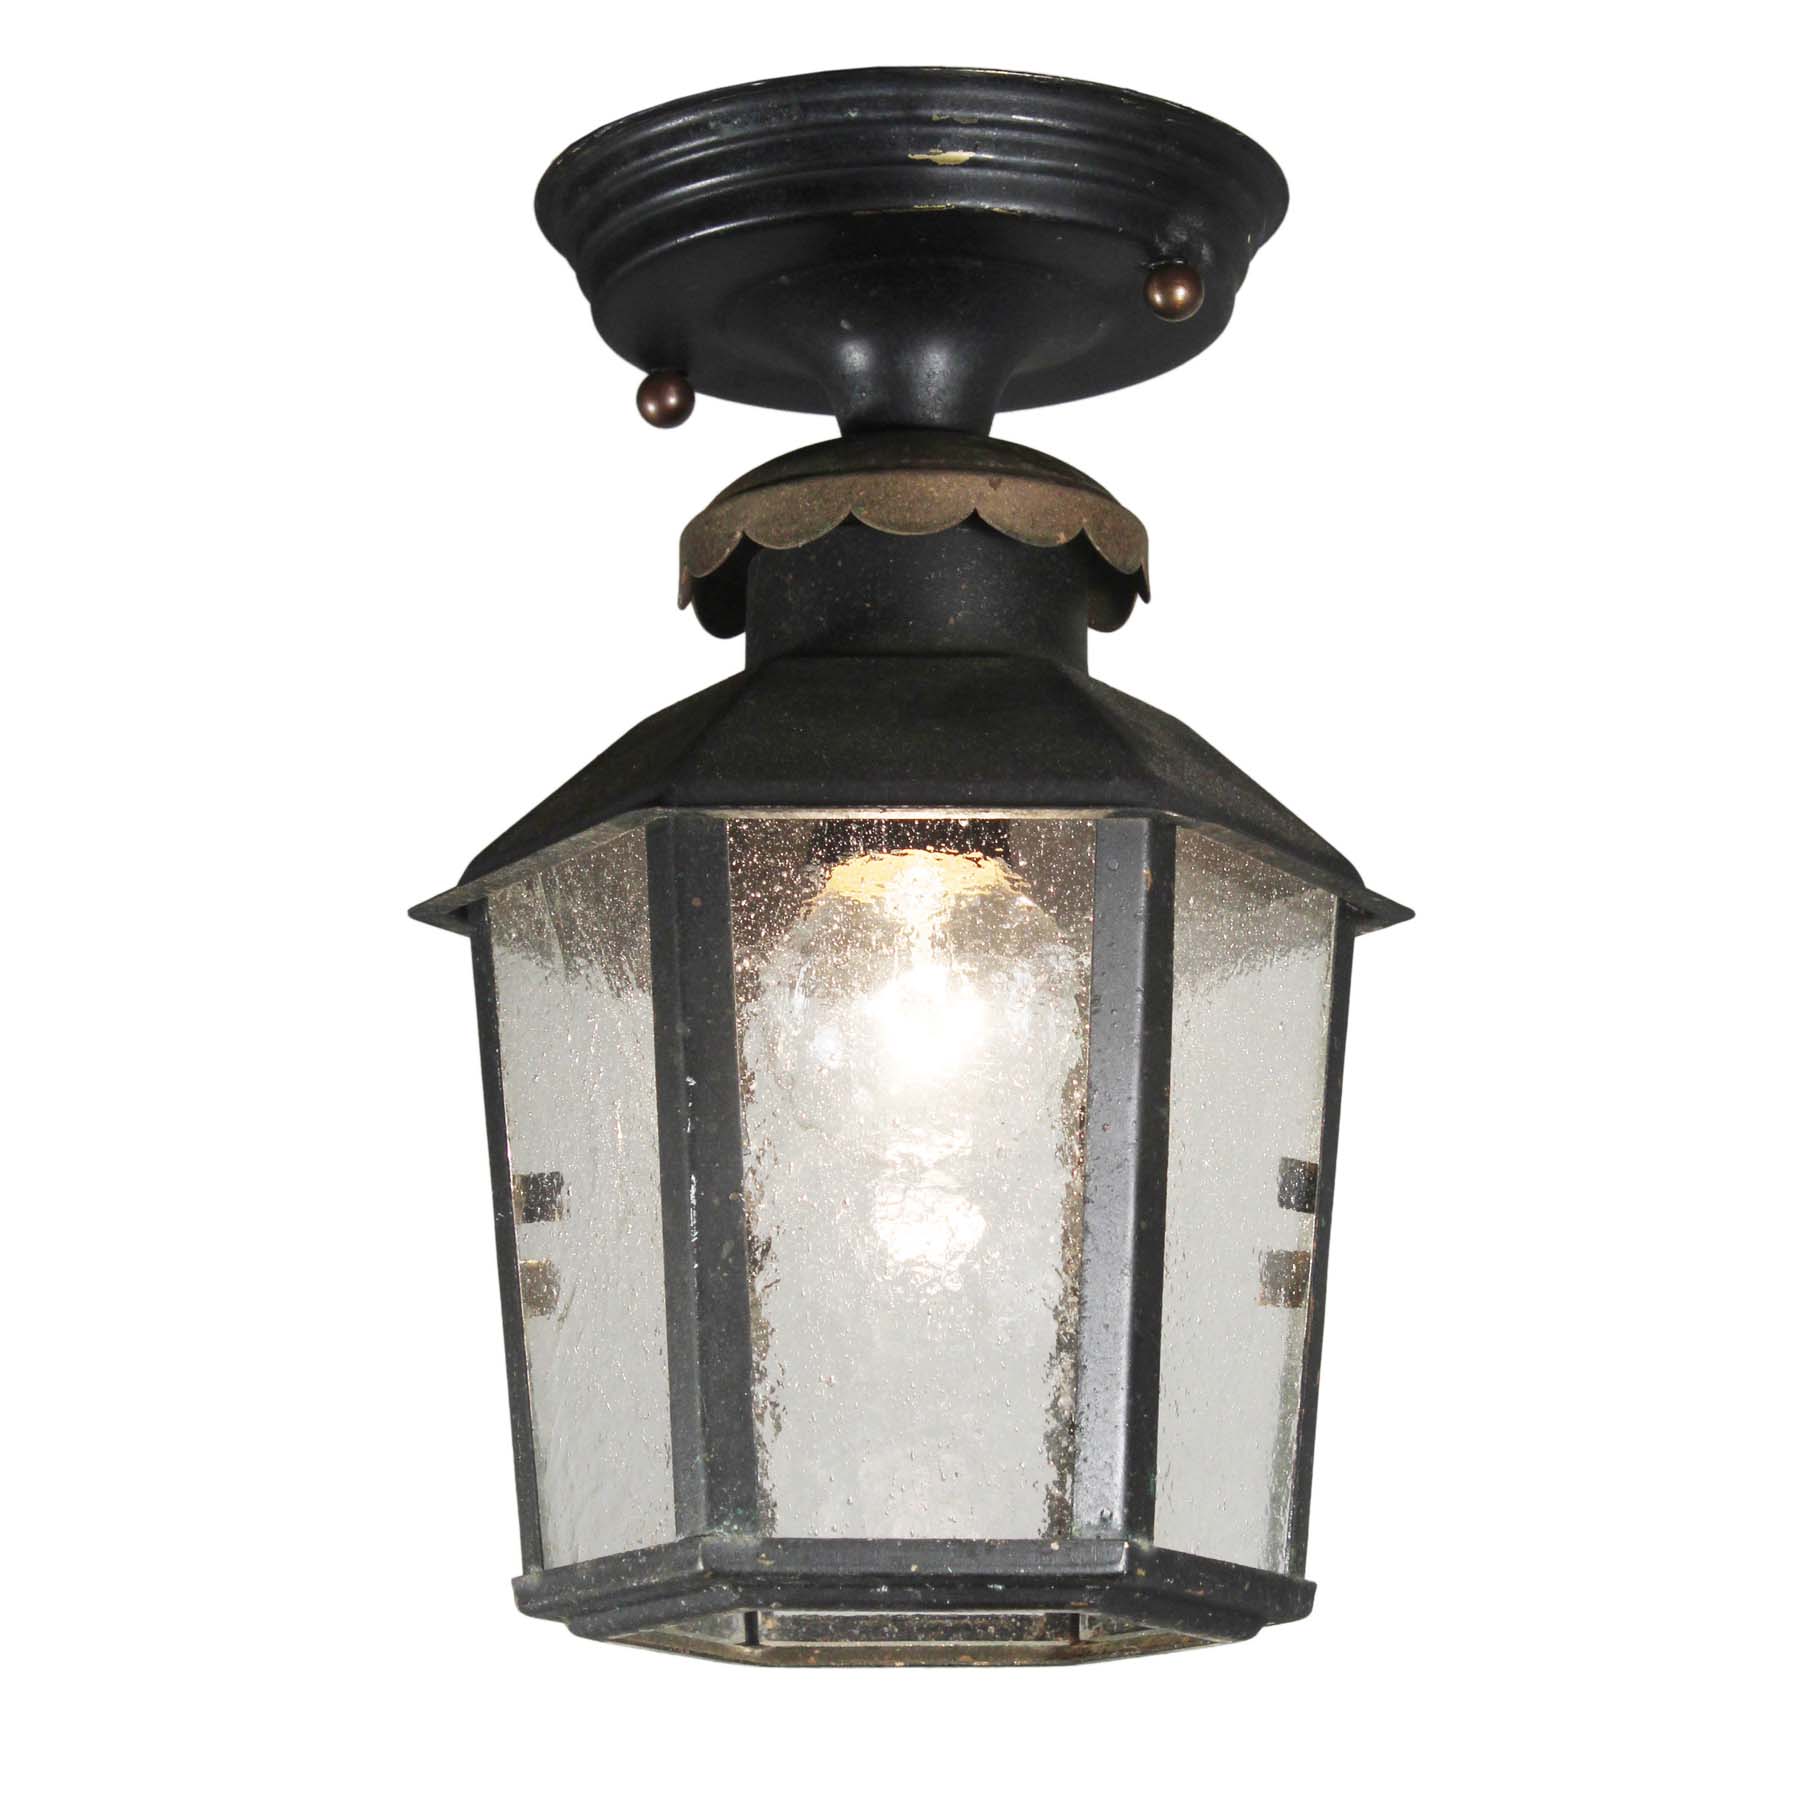 Sold Antique Flush Mount Lantern With, Outdoor Light Fixtures Charlotte Nc